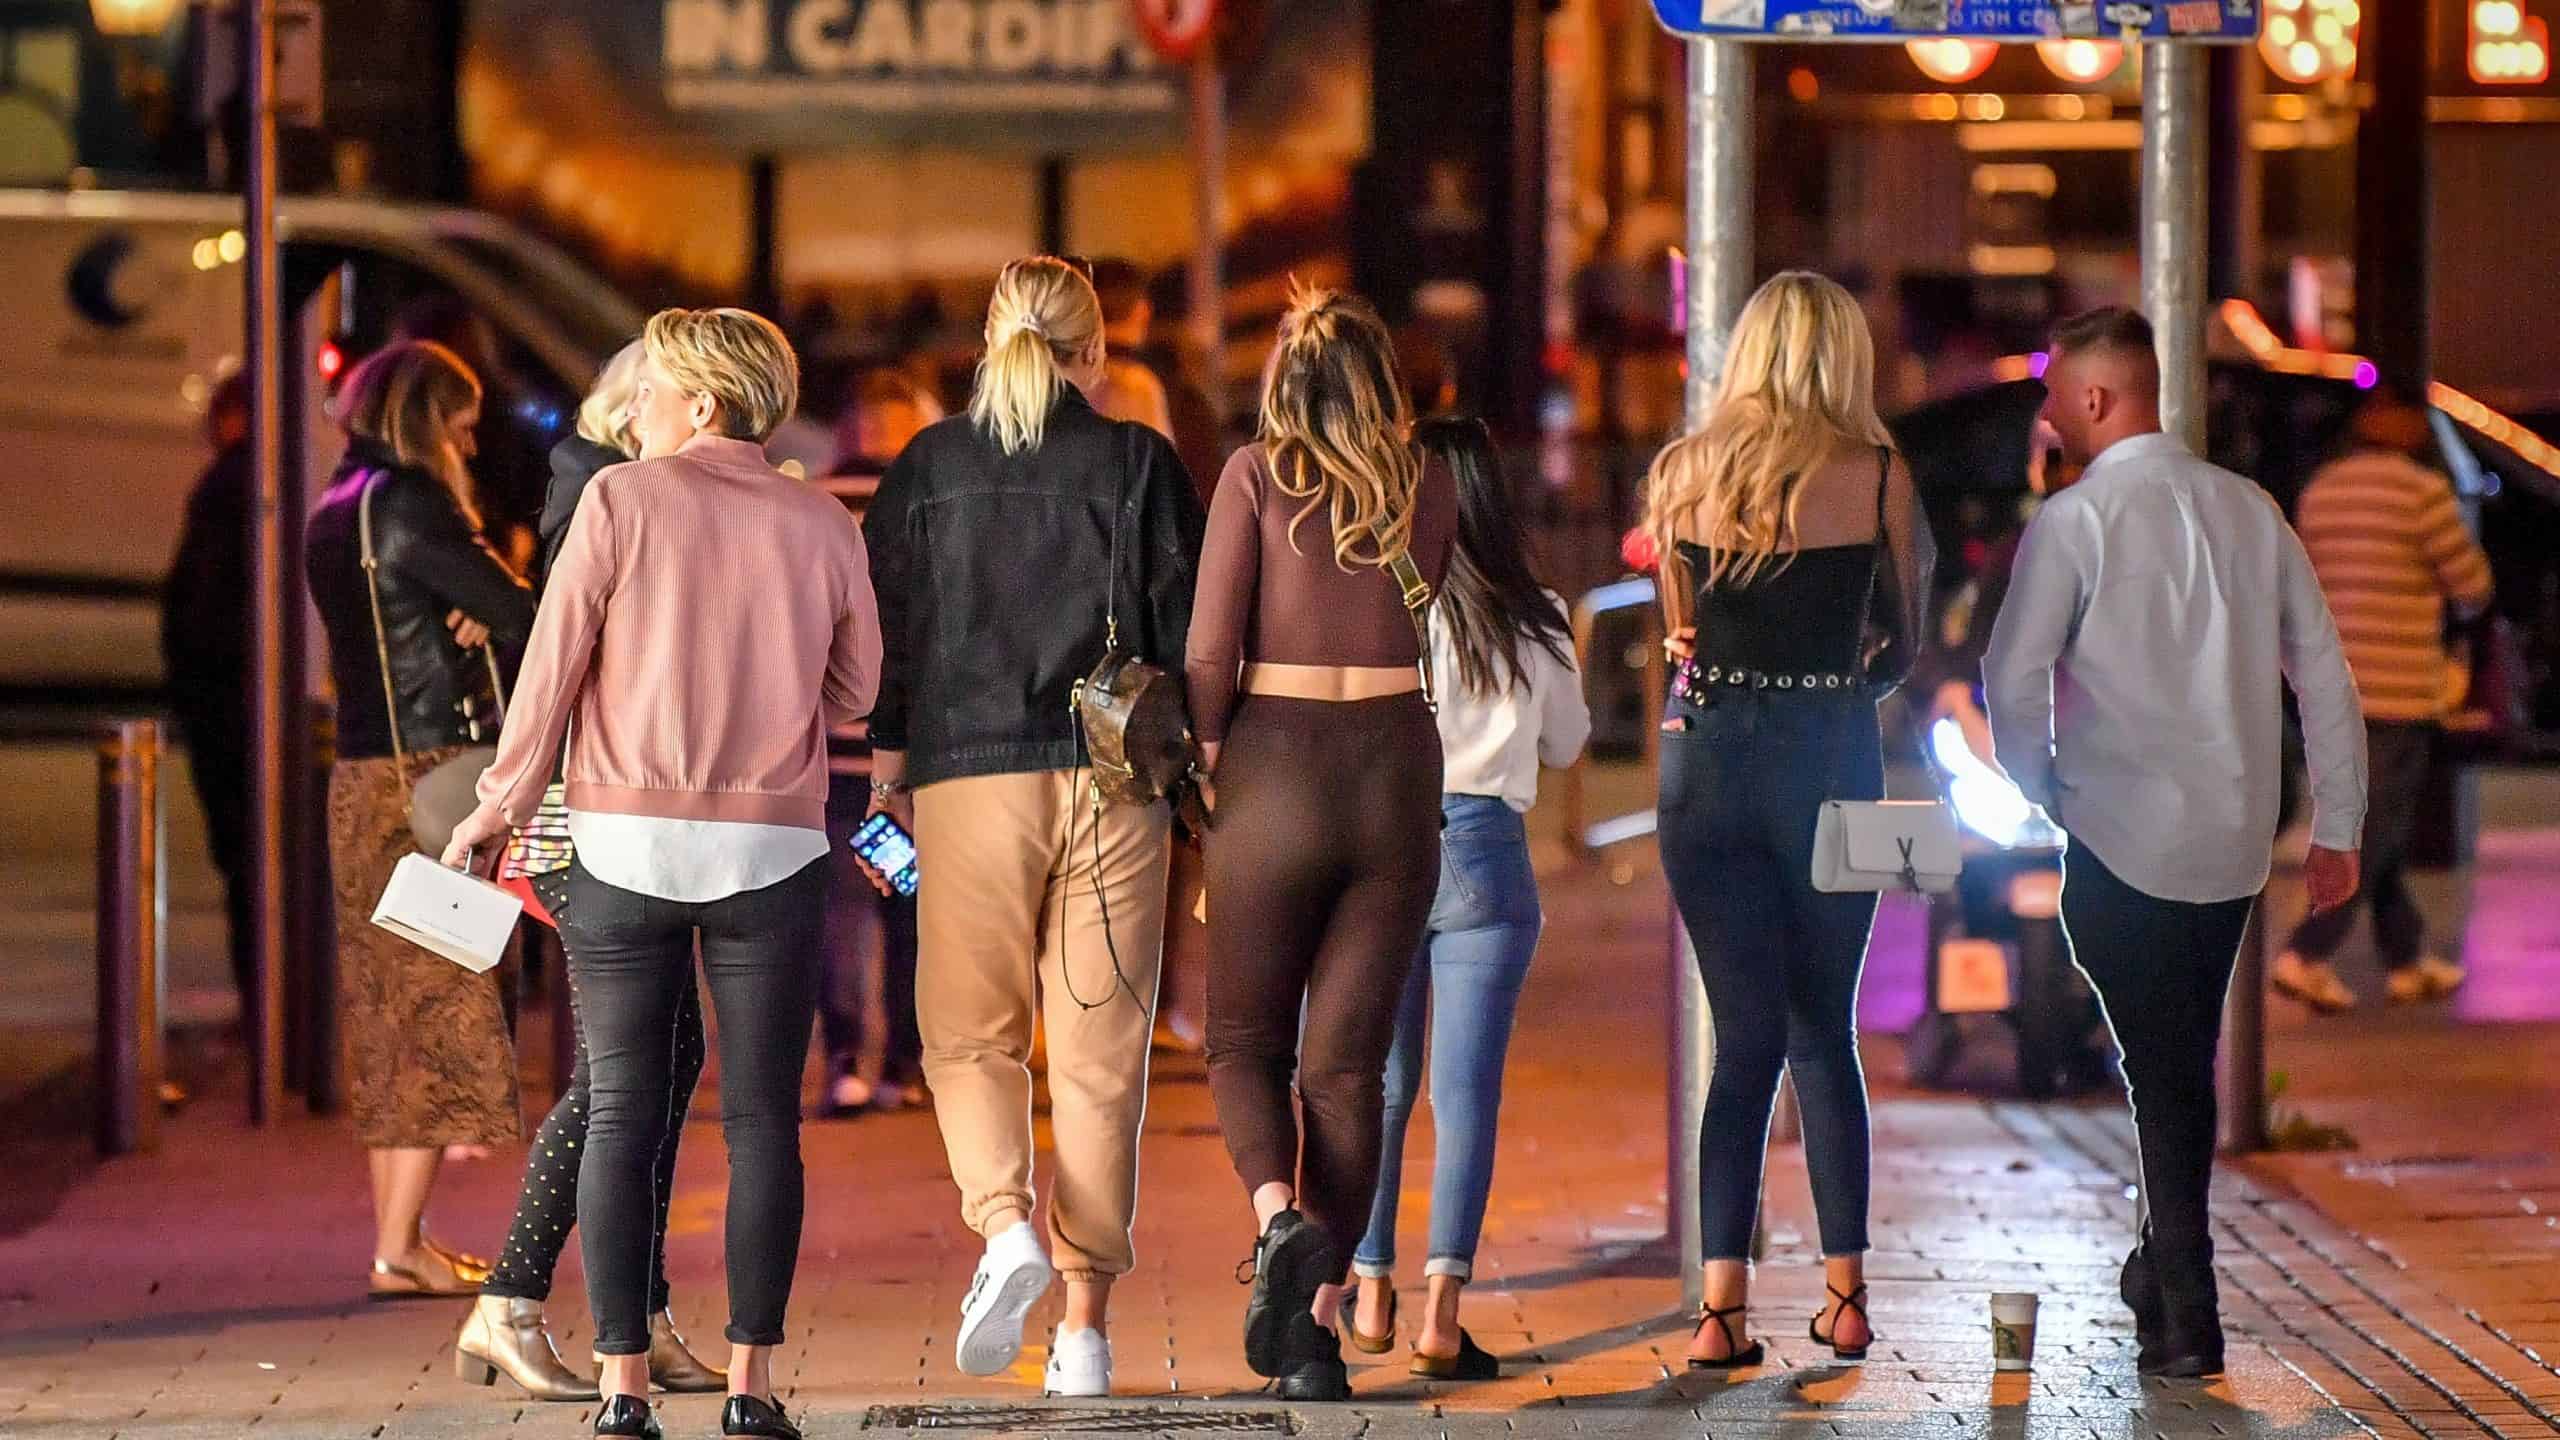 From £10 off to a 10pm curfew: Struggling hospitality sector reacts to new measures